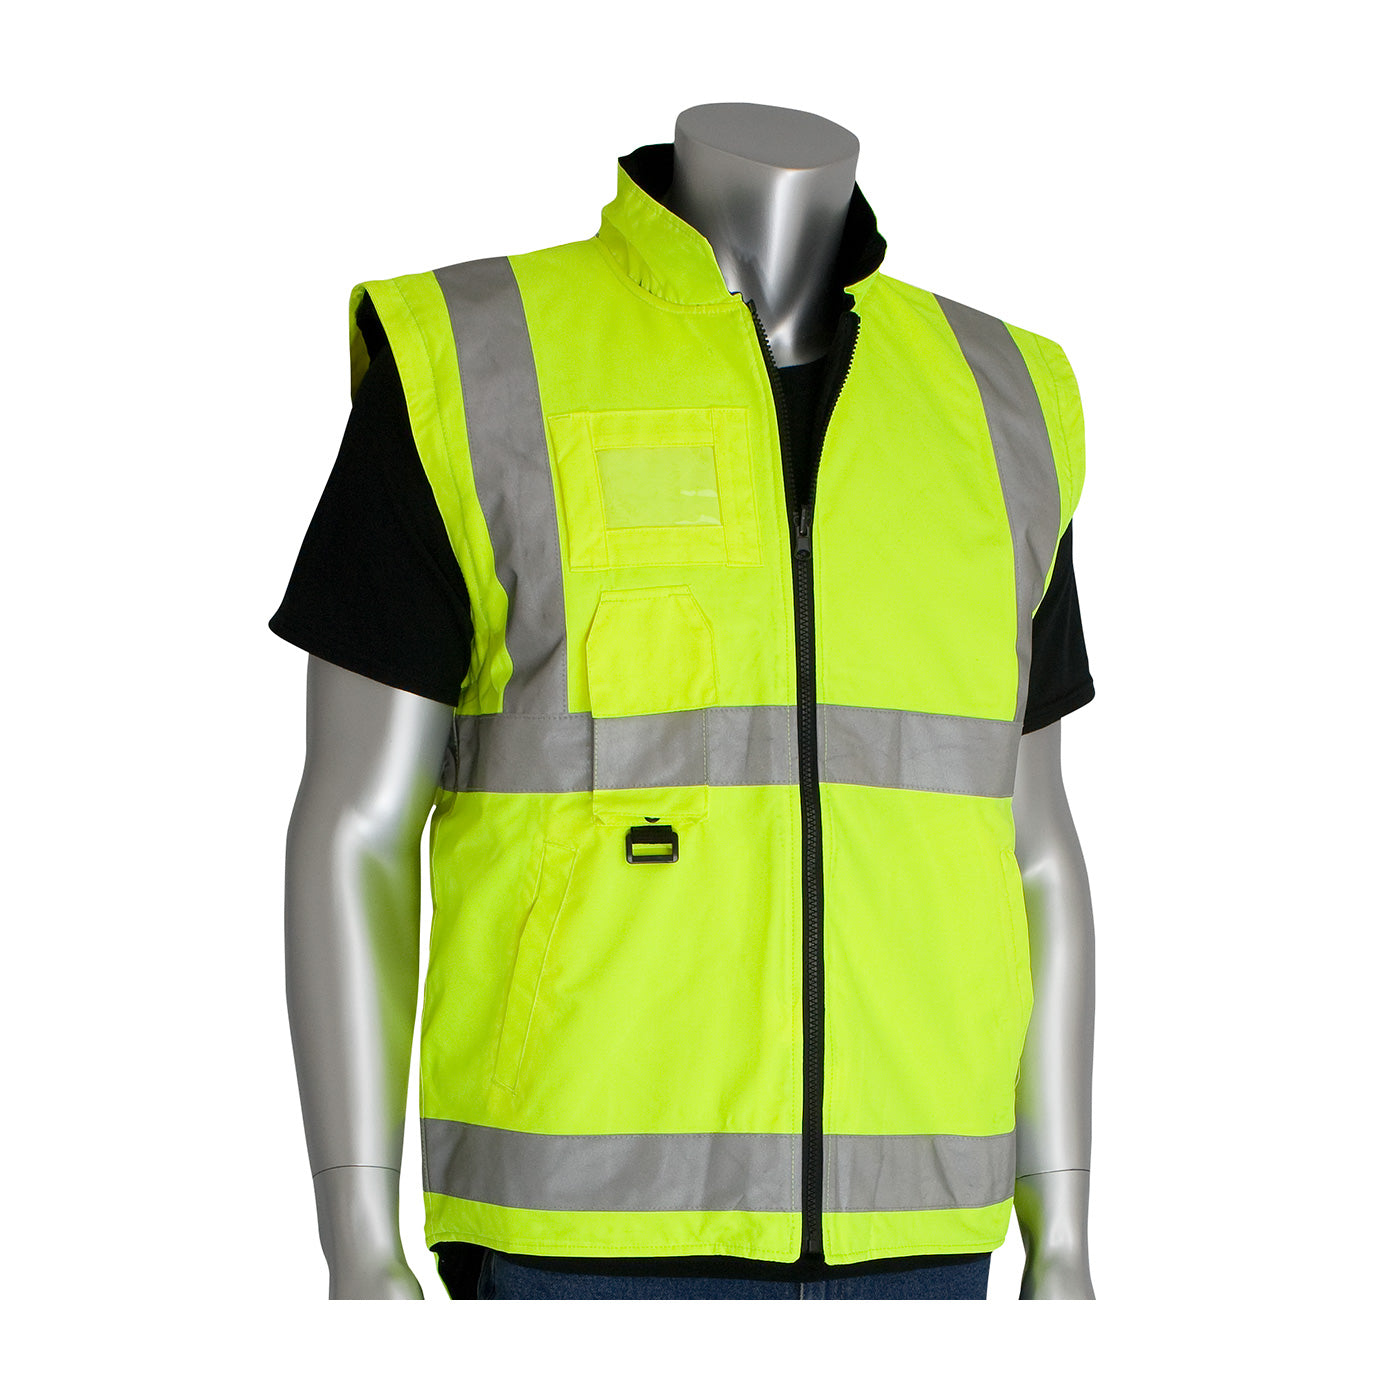 PIP 343-1756-YEL/3X ANSI Type R Class 3 7-in-1 All Conditions Coat with Inner Jacket and Vest Combination